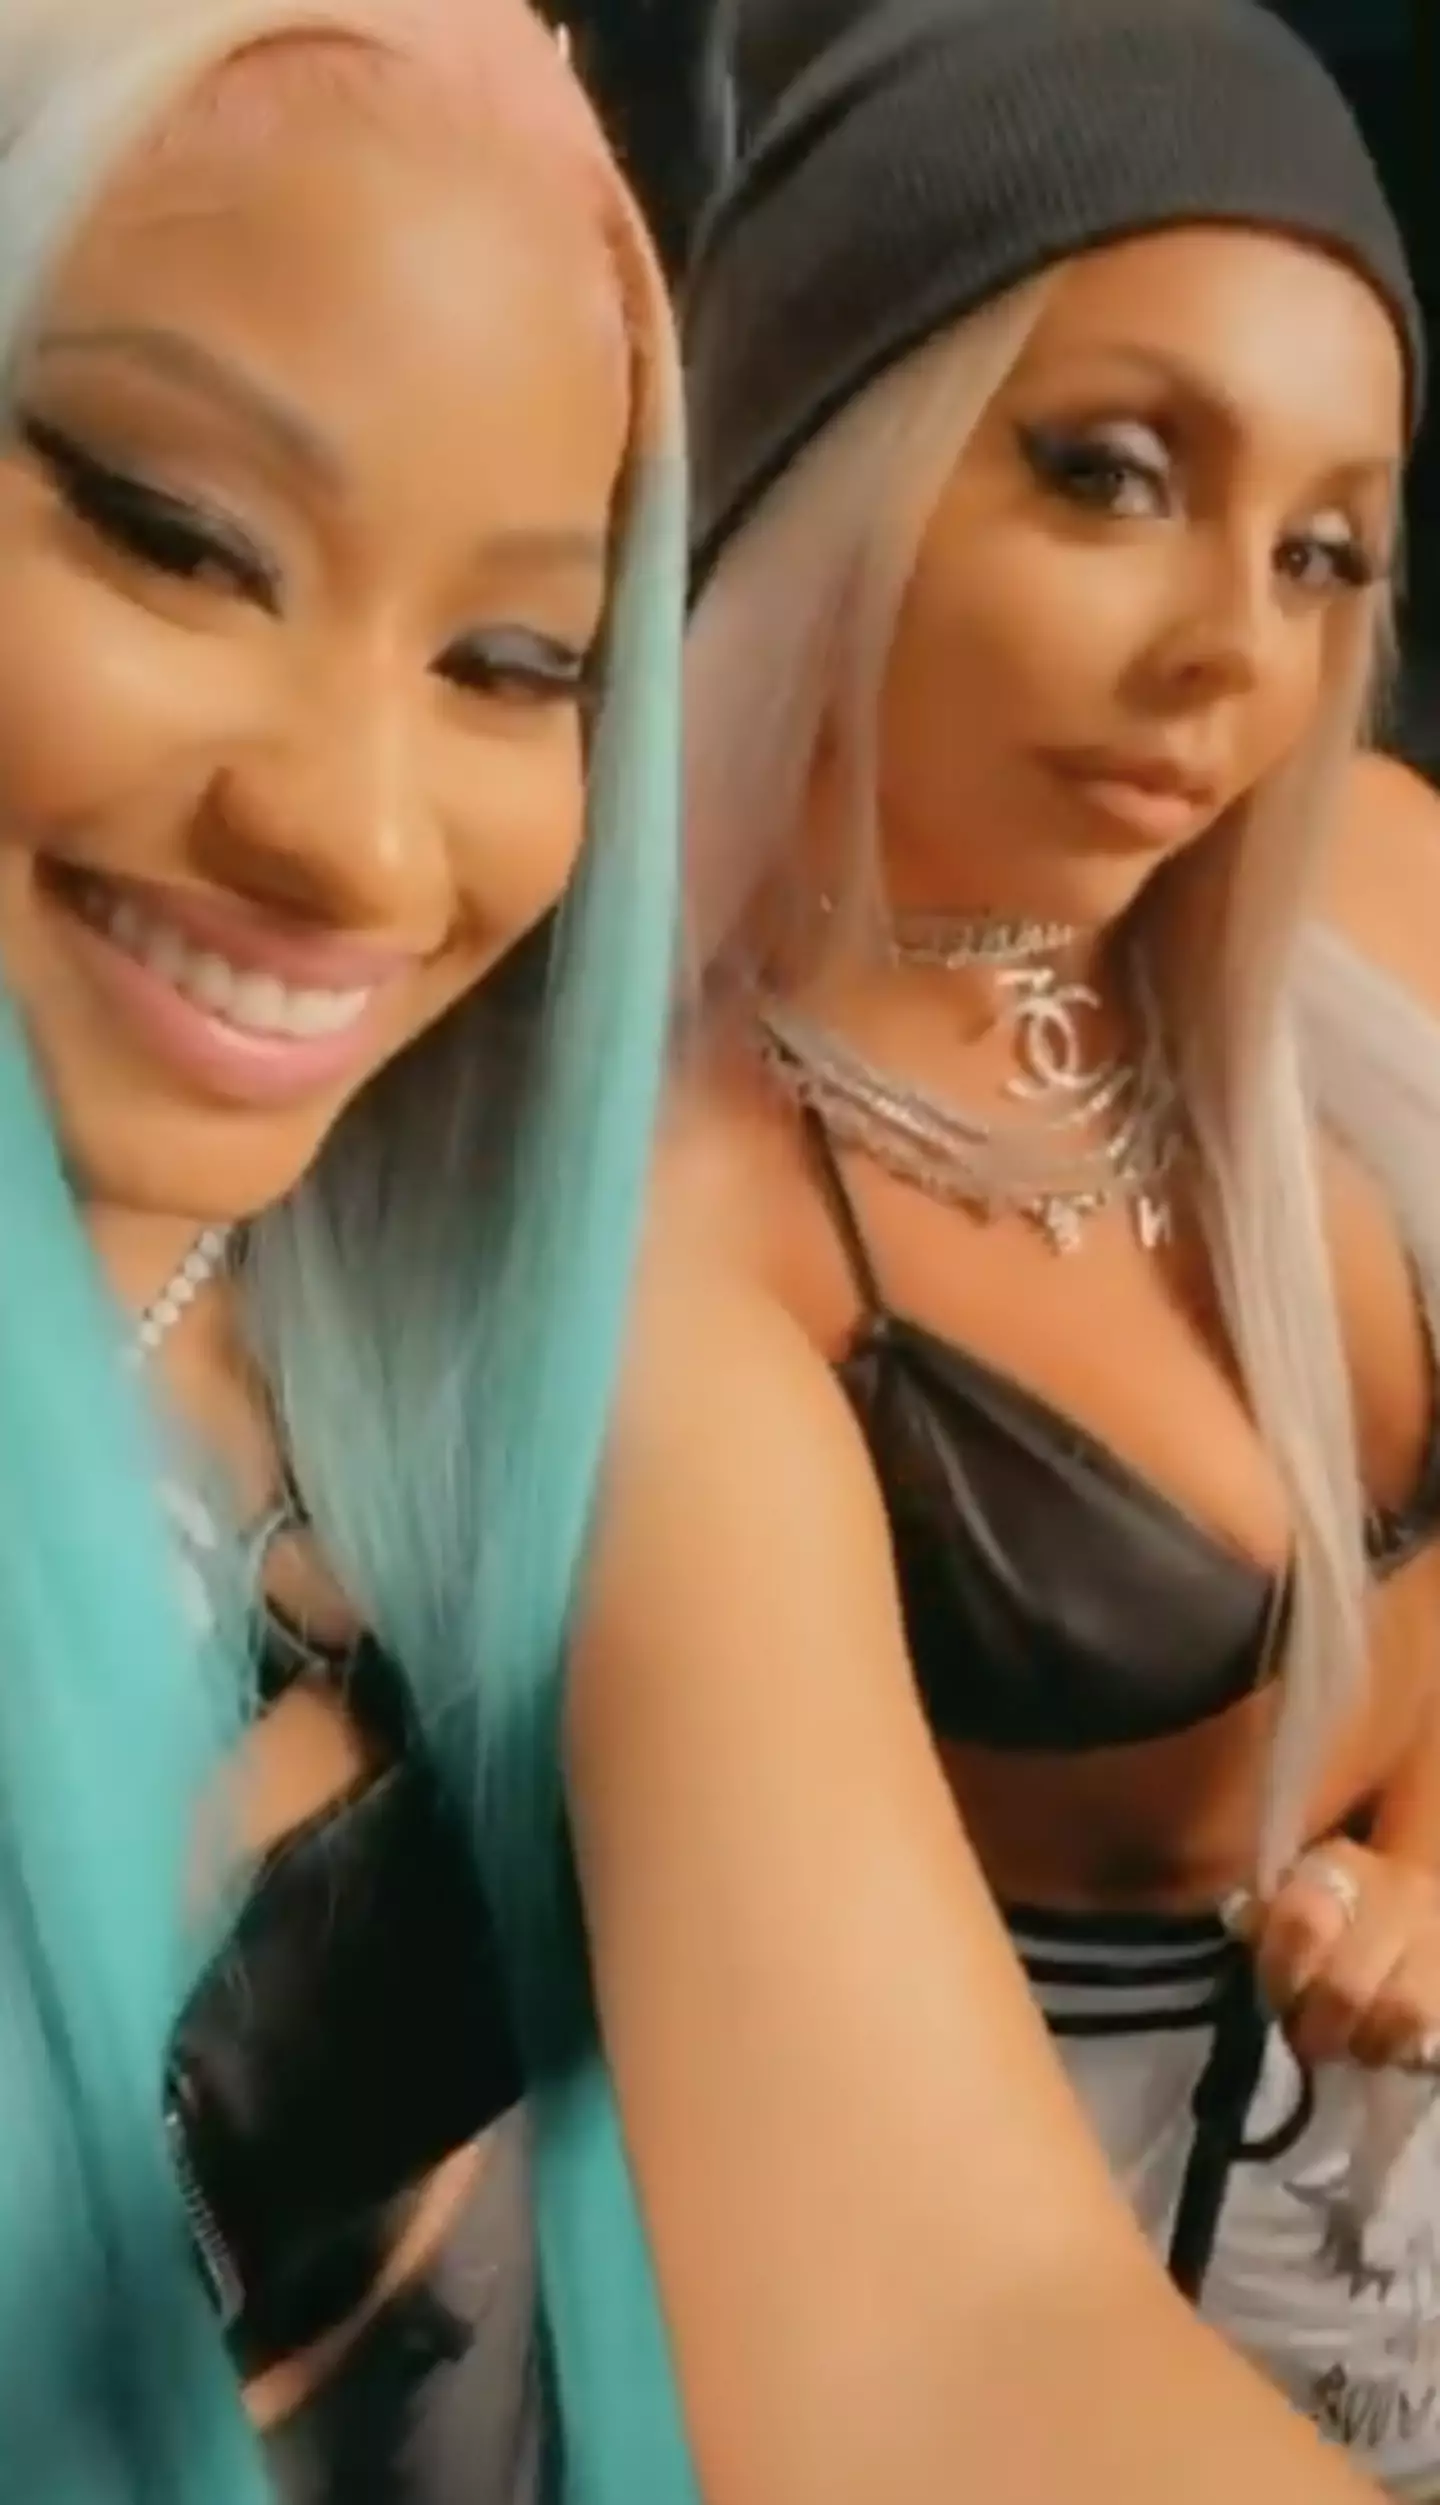 Nicki Minaj told fans of the Insta live earlier in the day (